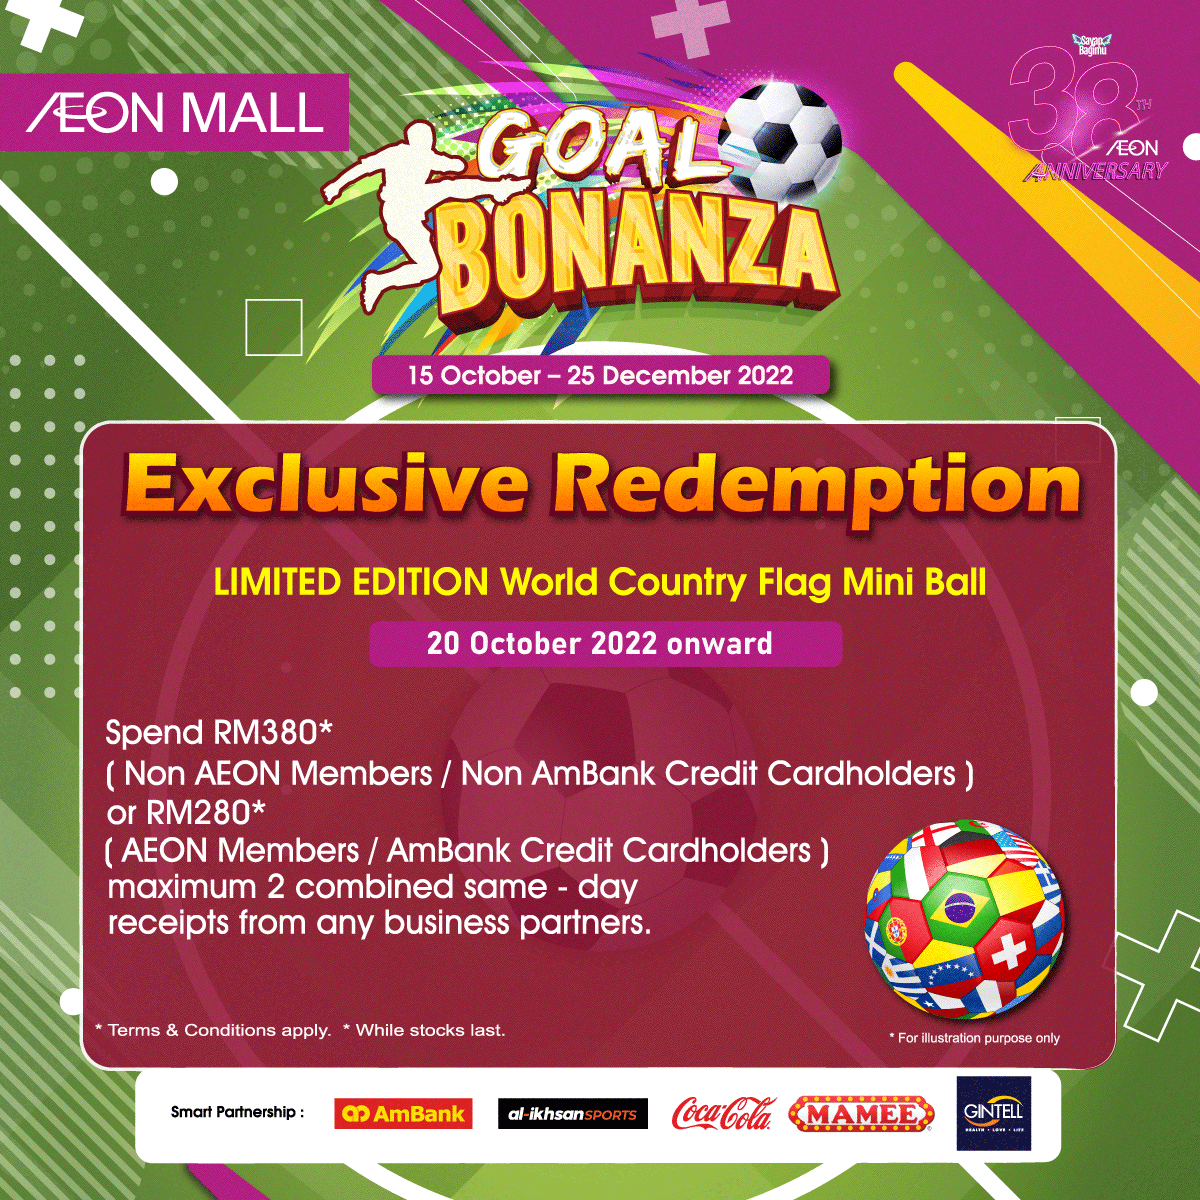 GOAL BONANZA EXCLUSIVE REDEMPTION - LIMITED EDITION WORLD COUNTRY FLAG MINI BALL